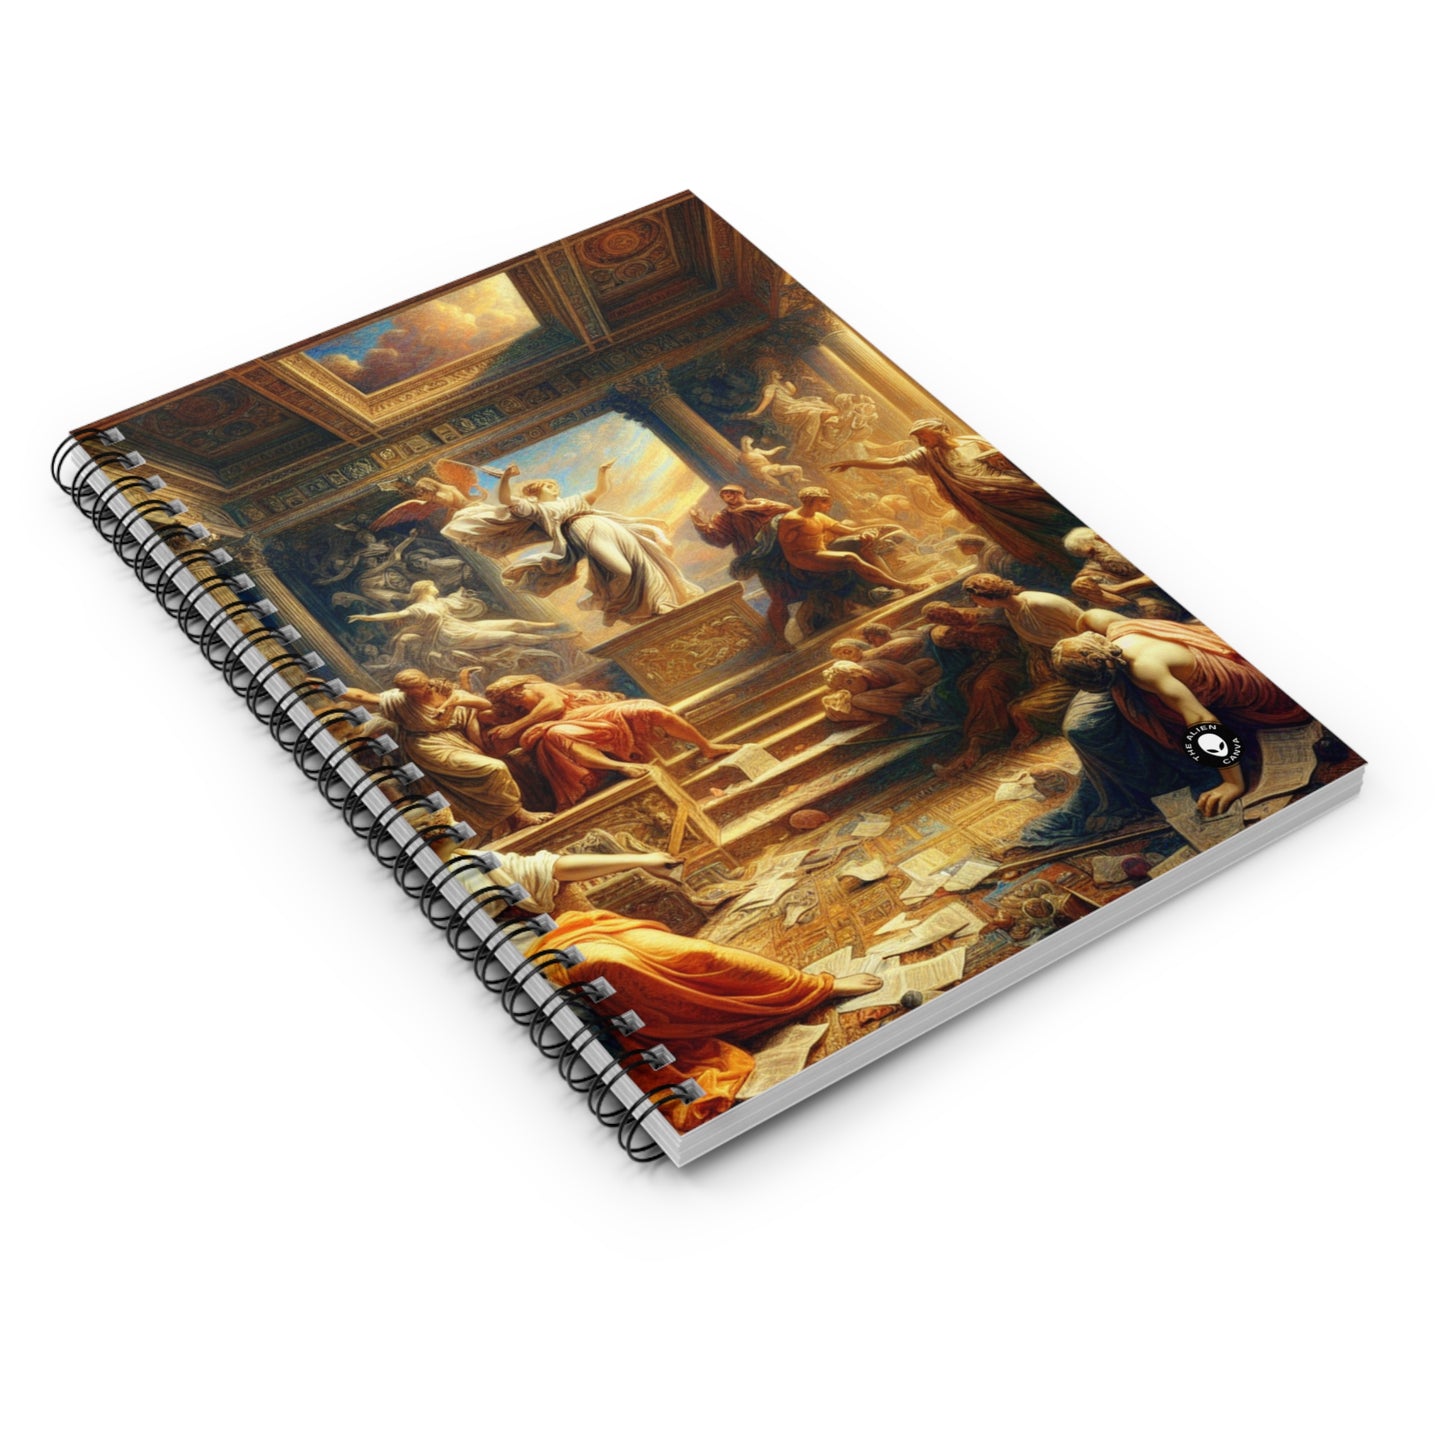 "Modern Renaissance: Leaders of Today" - The Alien Spiral Notebook (Ruled Line) Neoclassicism